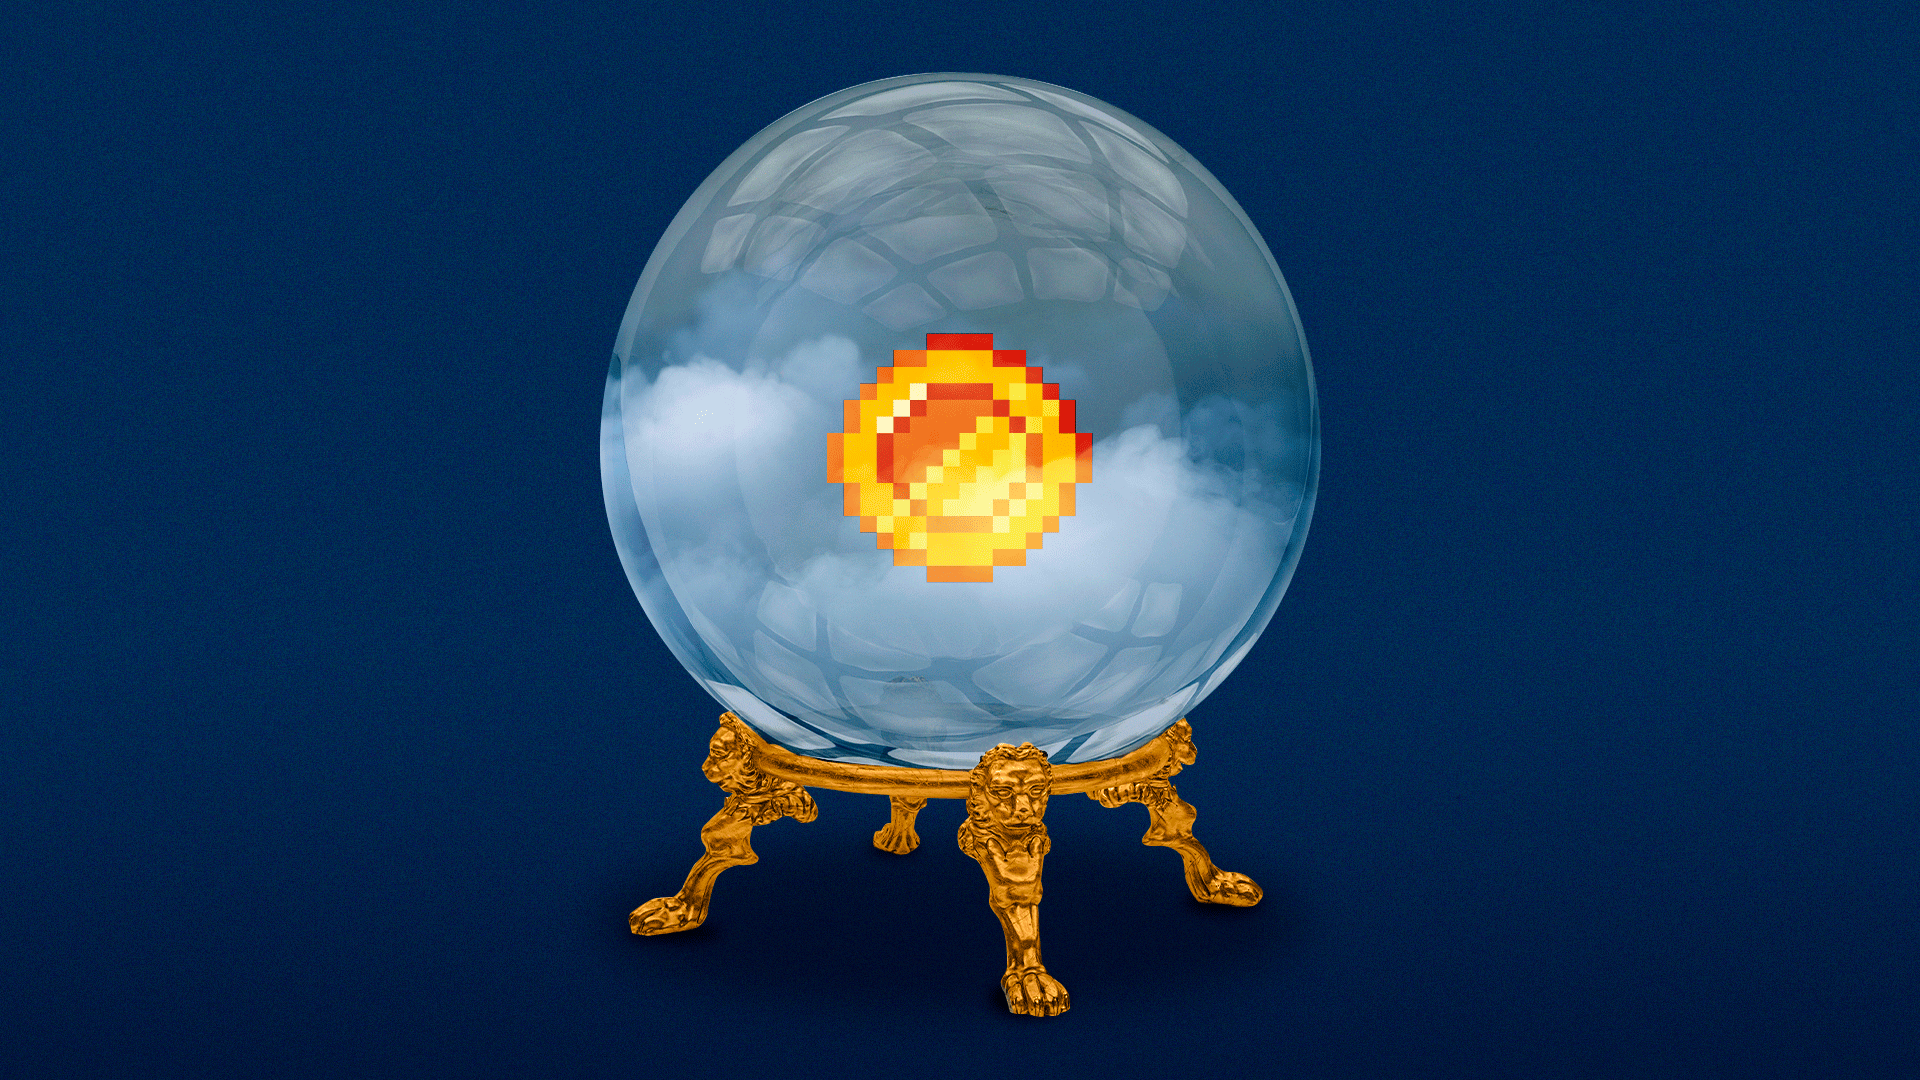 Illustration of a crystal ball with a pixelated coin inside. 